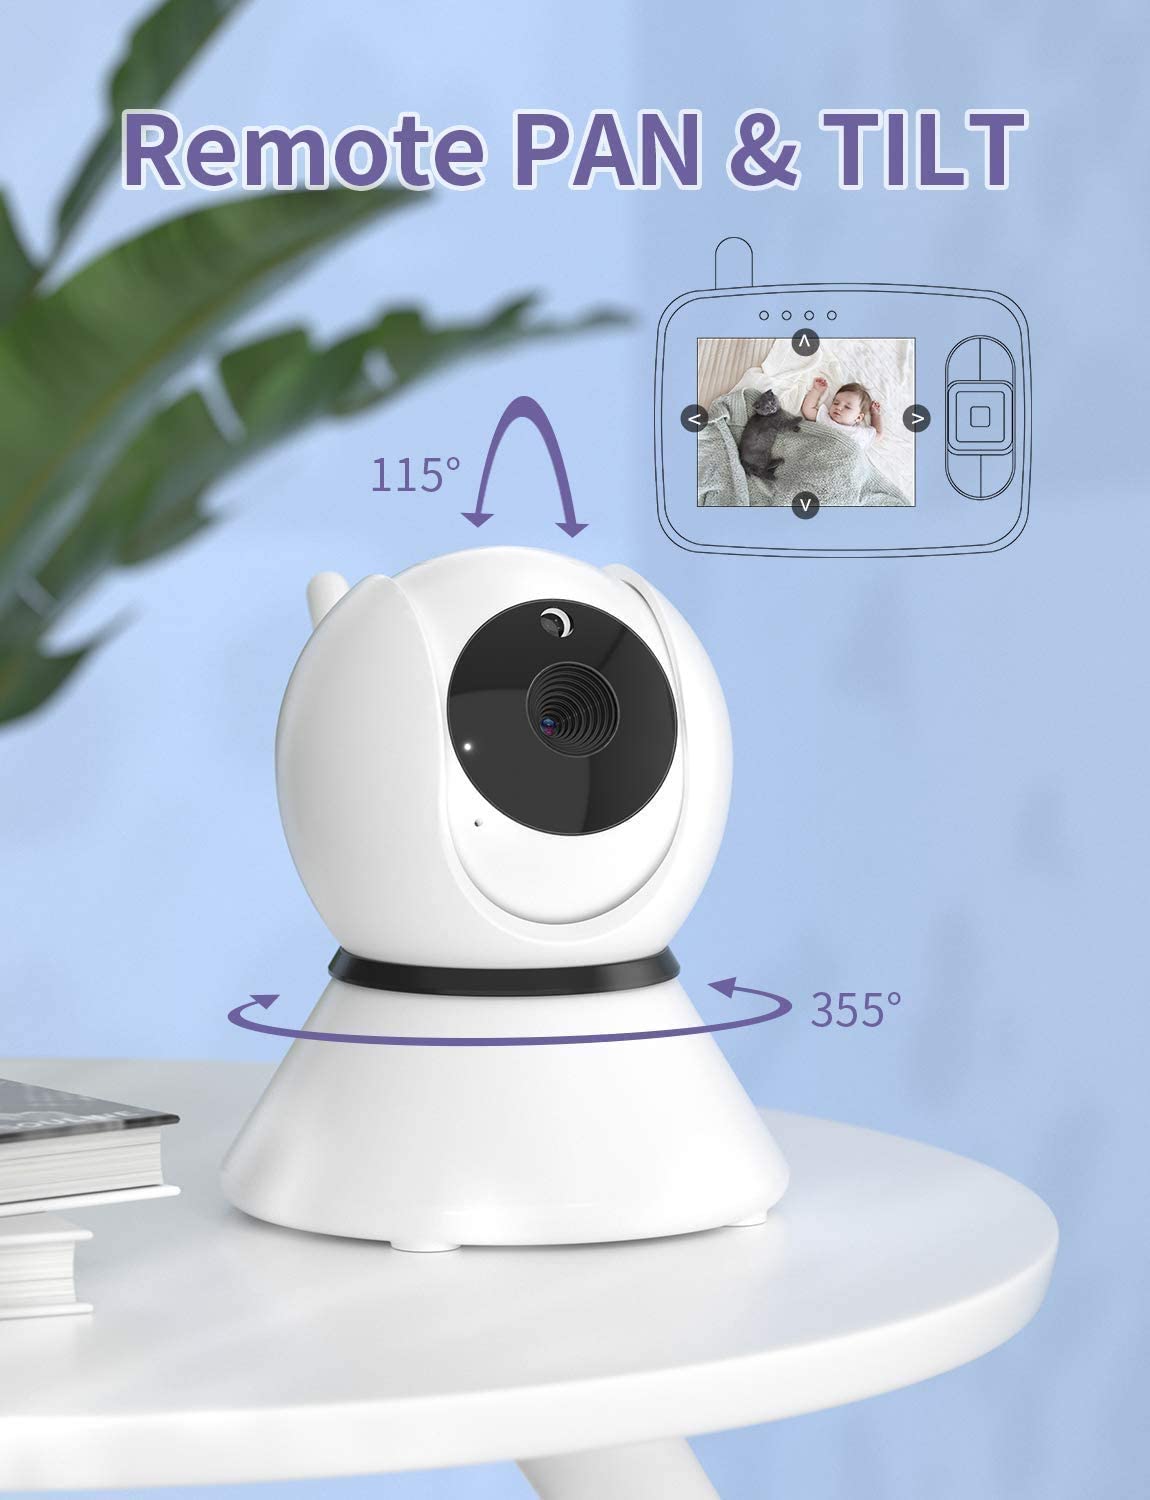 GHB Baby Monitor with Camera and Audio Pan-Tilt-Zoom Baby Camera Monitor  3.5″ Night Vision, Two-Way Audio, Lullaby Player with Wall Mount – GHB